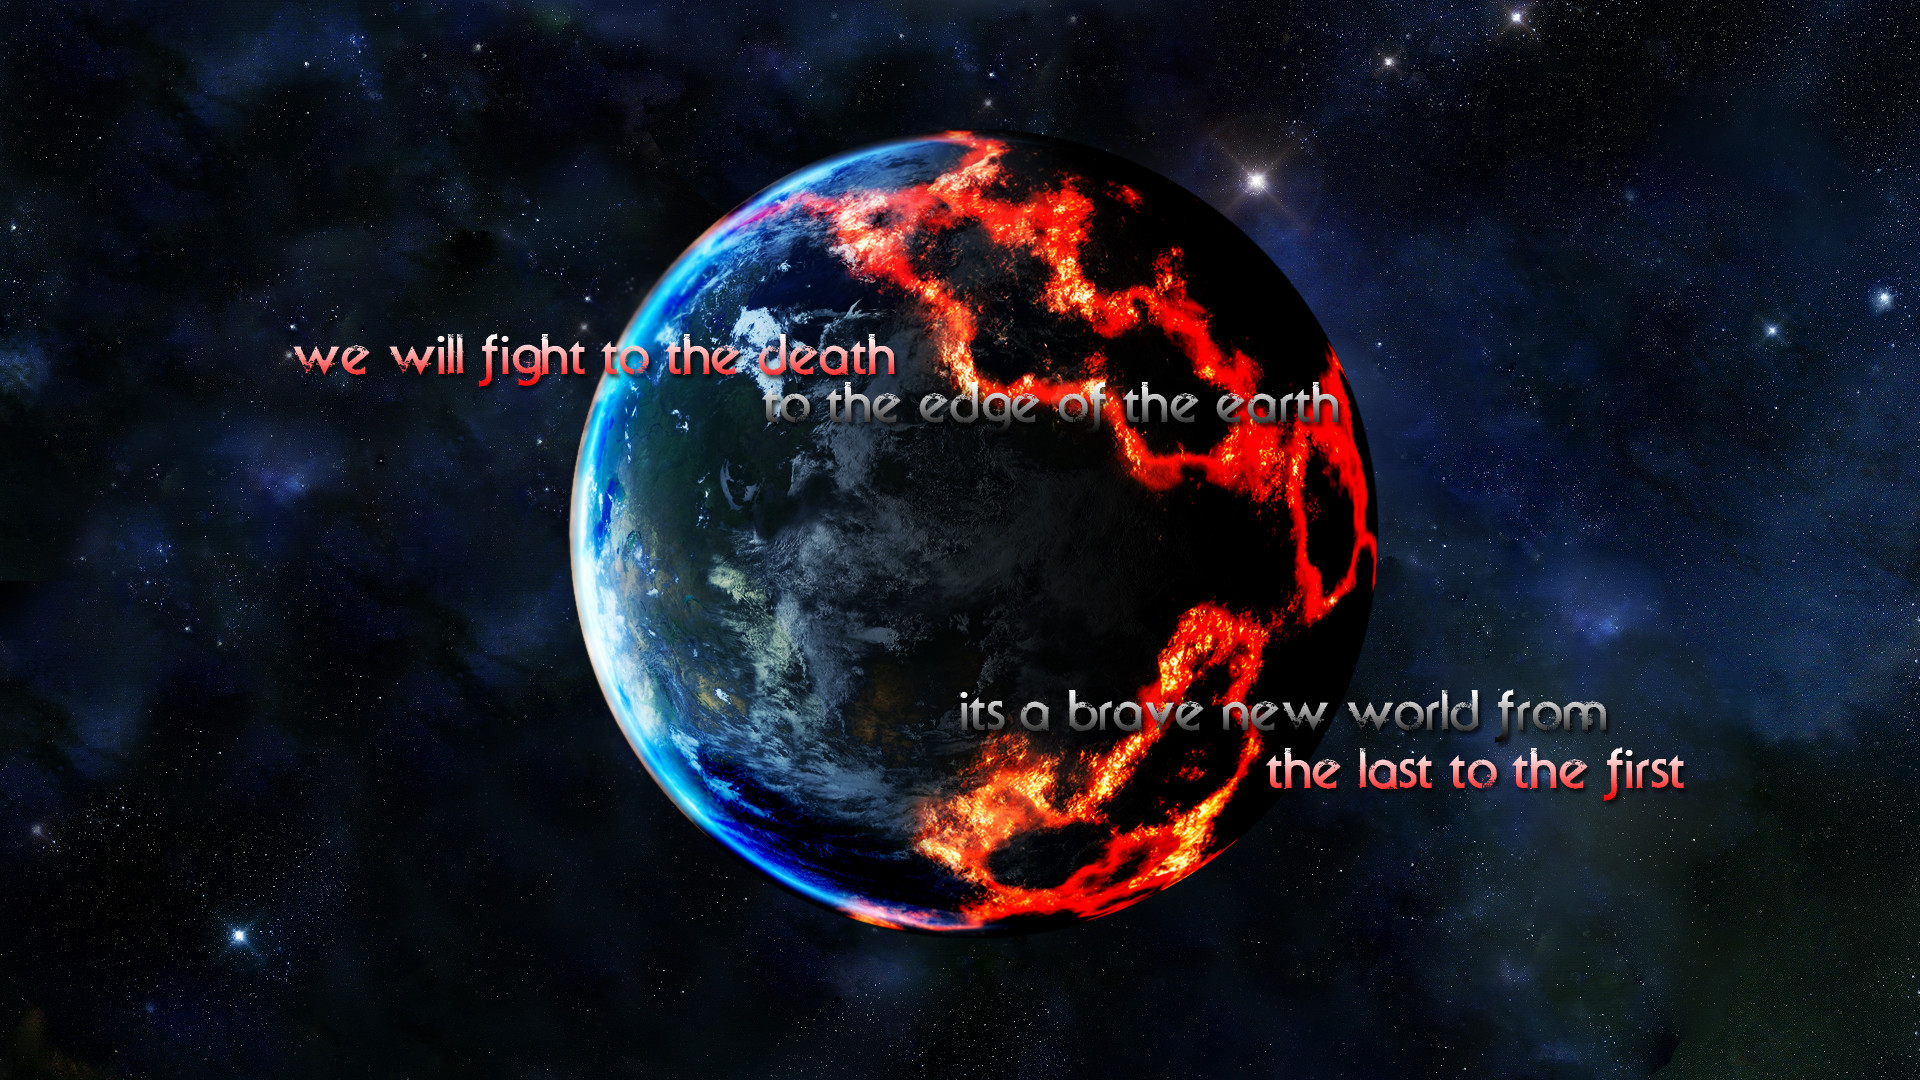 1920x1080 ... 30 Seconds to Mars - Earth by sashley46